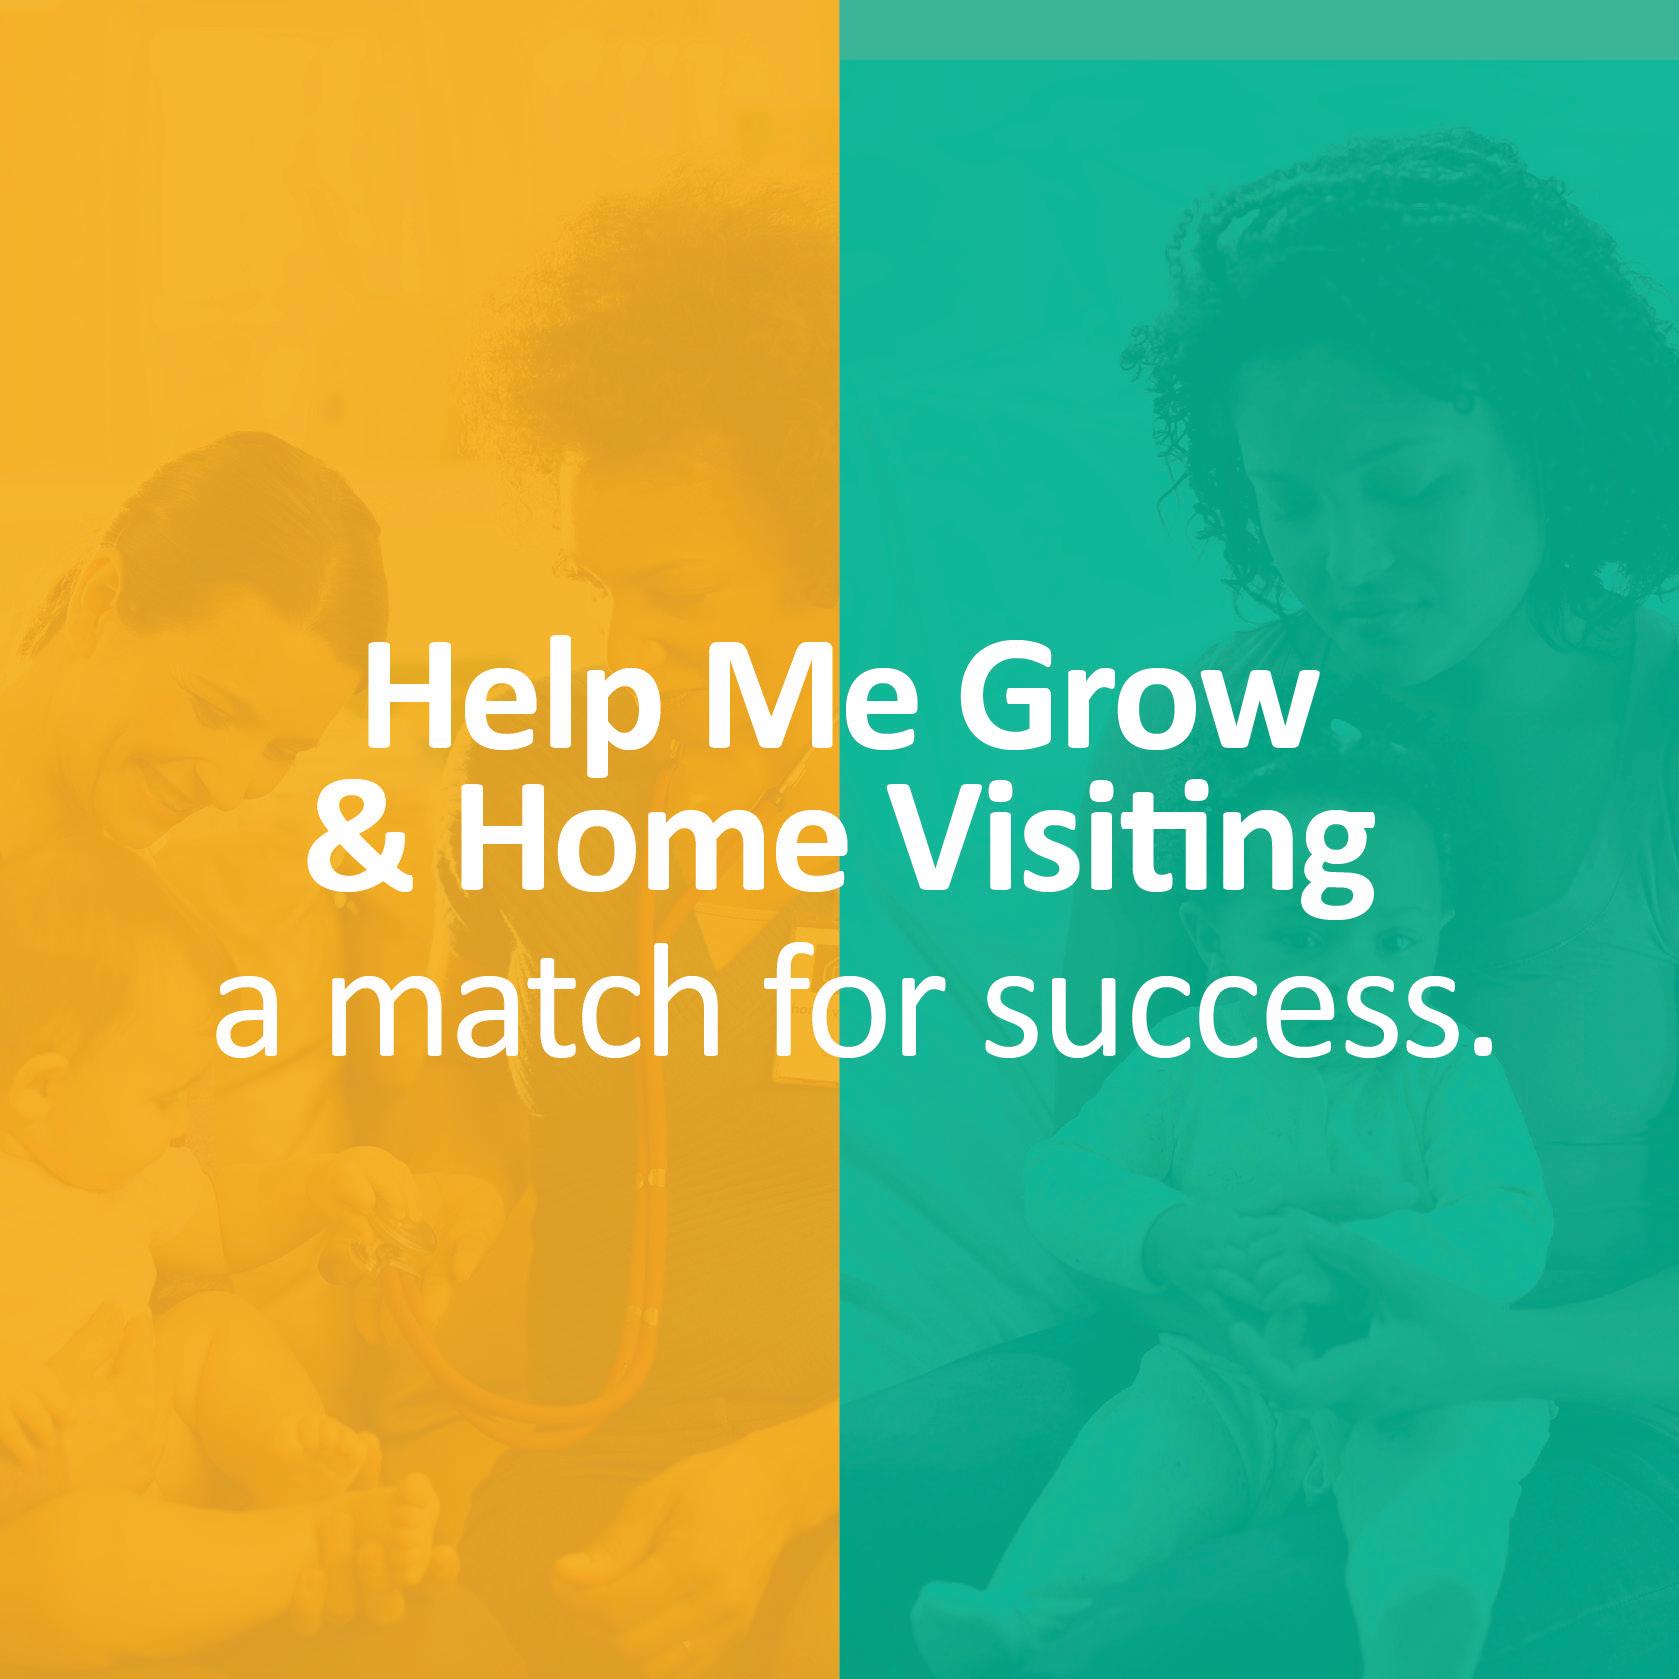 Help Me Grow and Home Visiting: A Match for Success